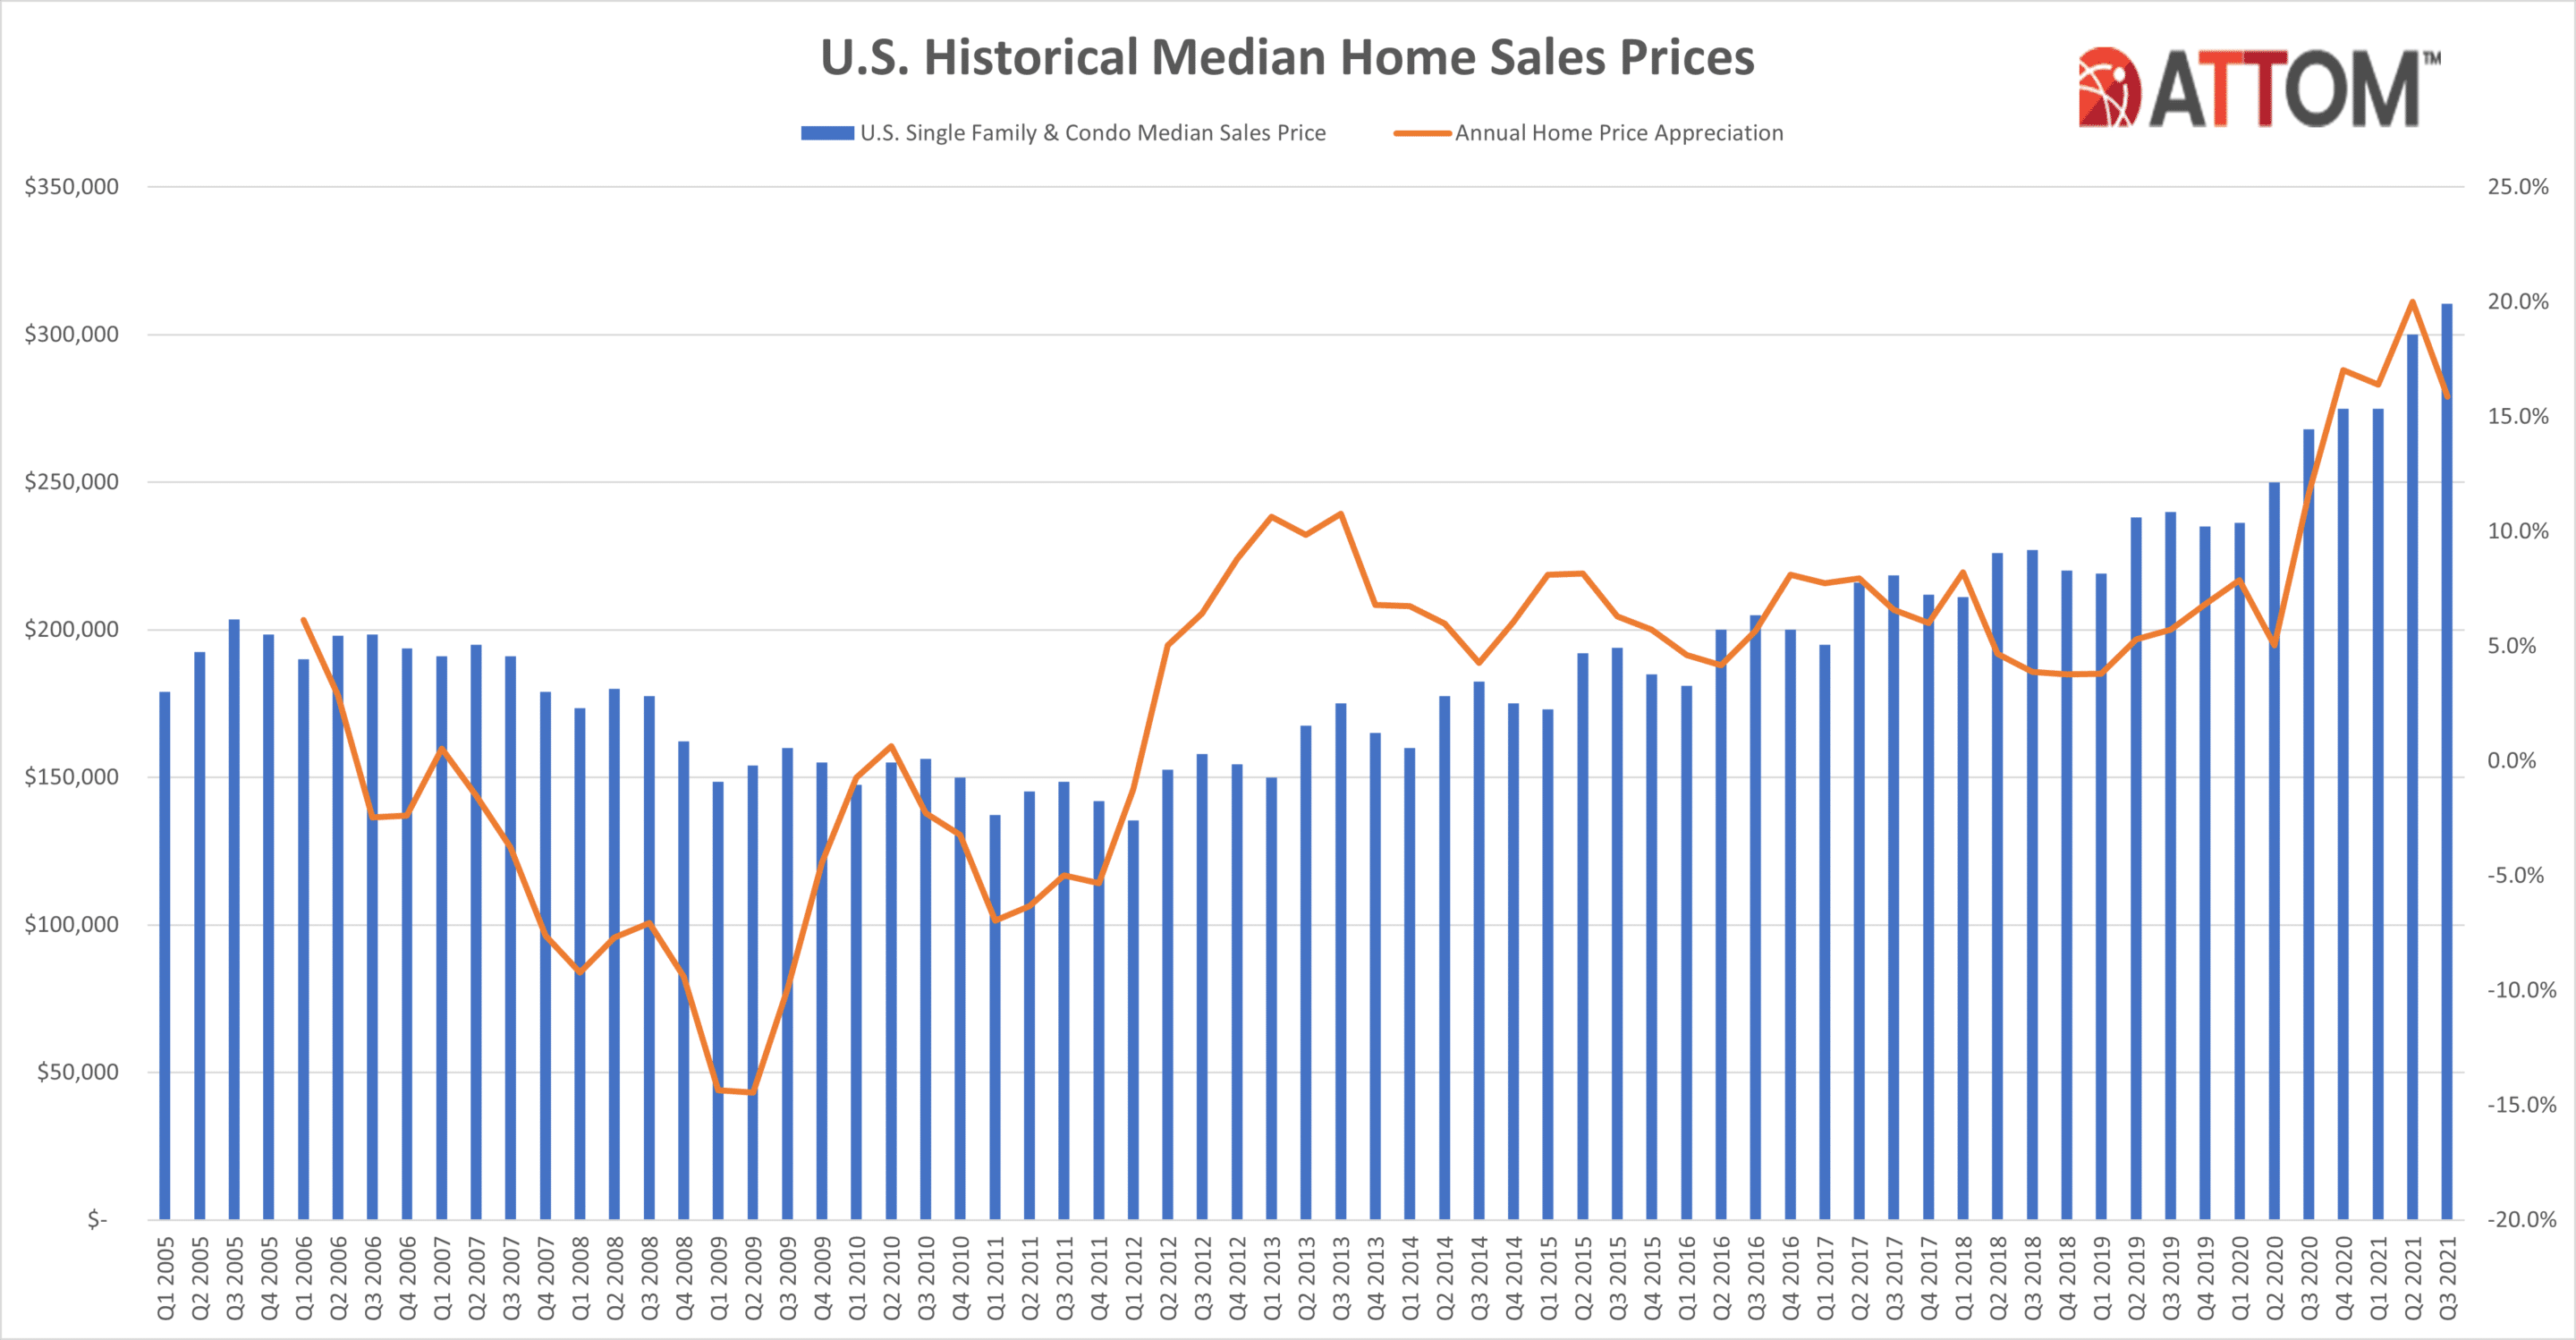 https://www.worldpropertyjournal.com/news-assets/Historical-Median-Sales-Prices.png